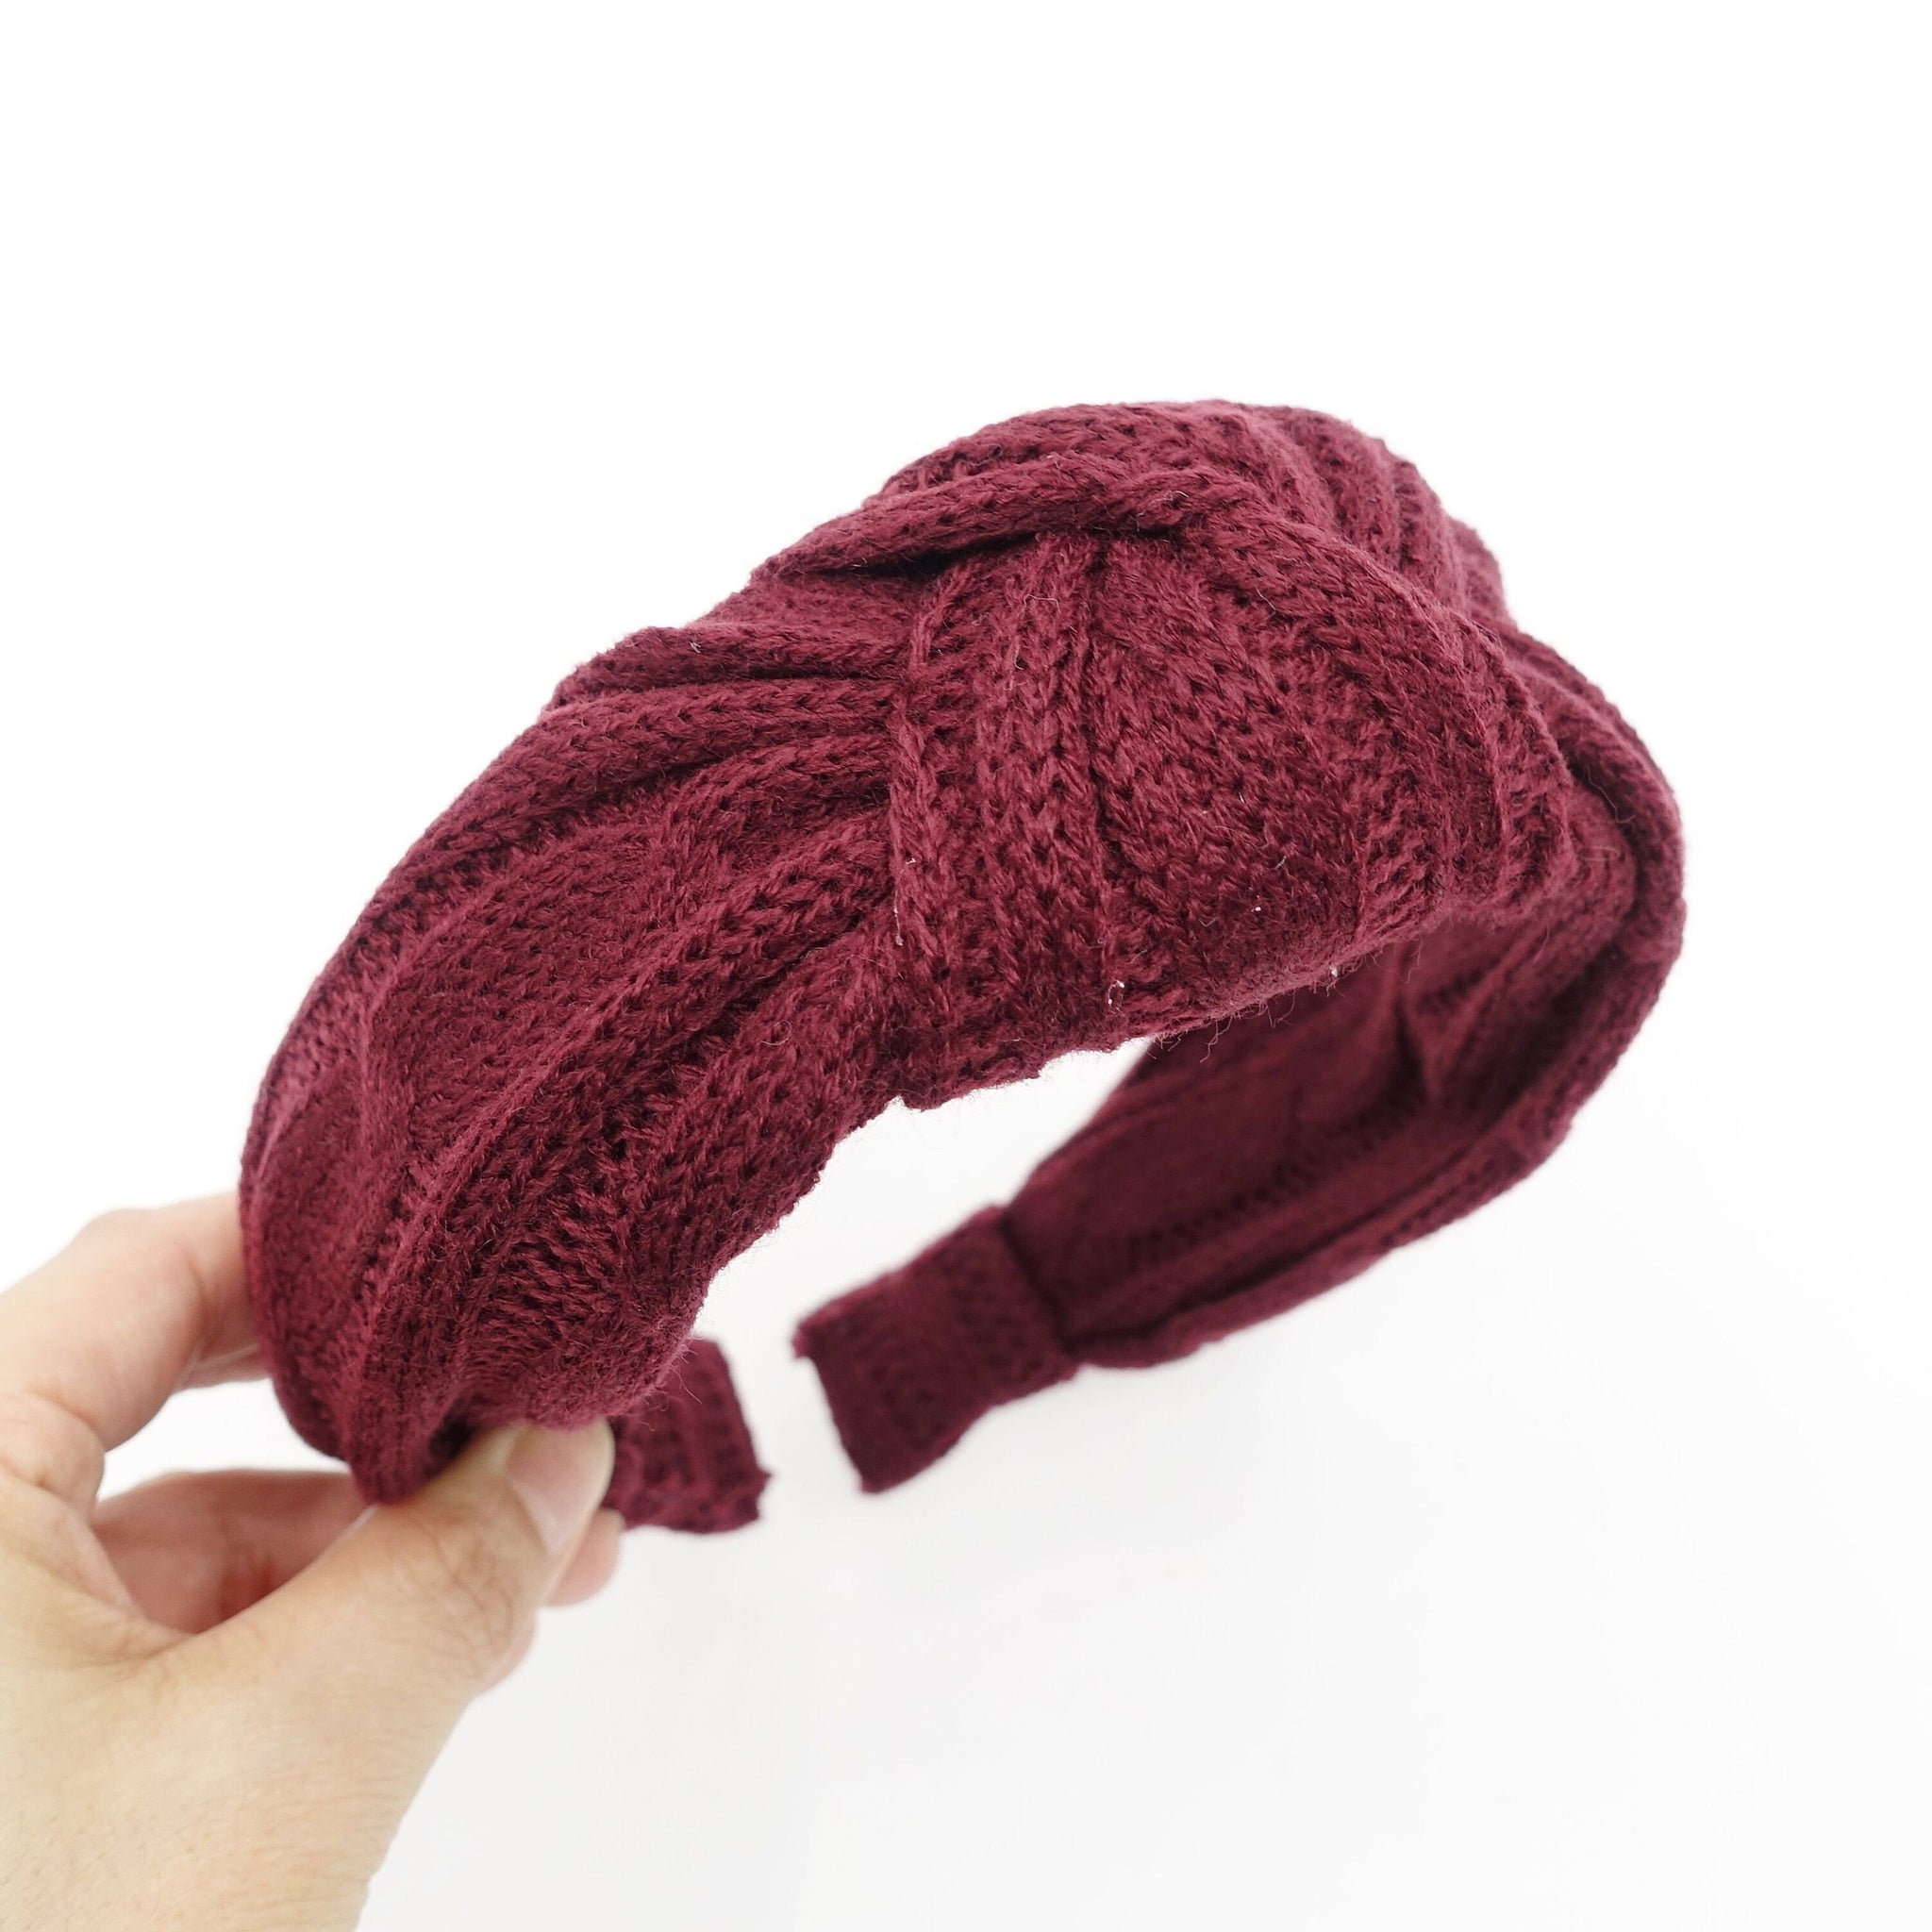 veryshine.com Headband Red wine cable knit pattern headband top knot hairband hair accessories